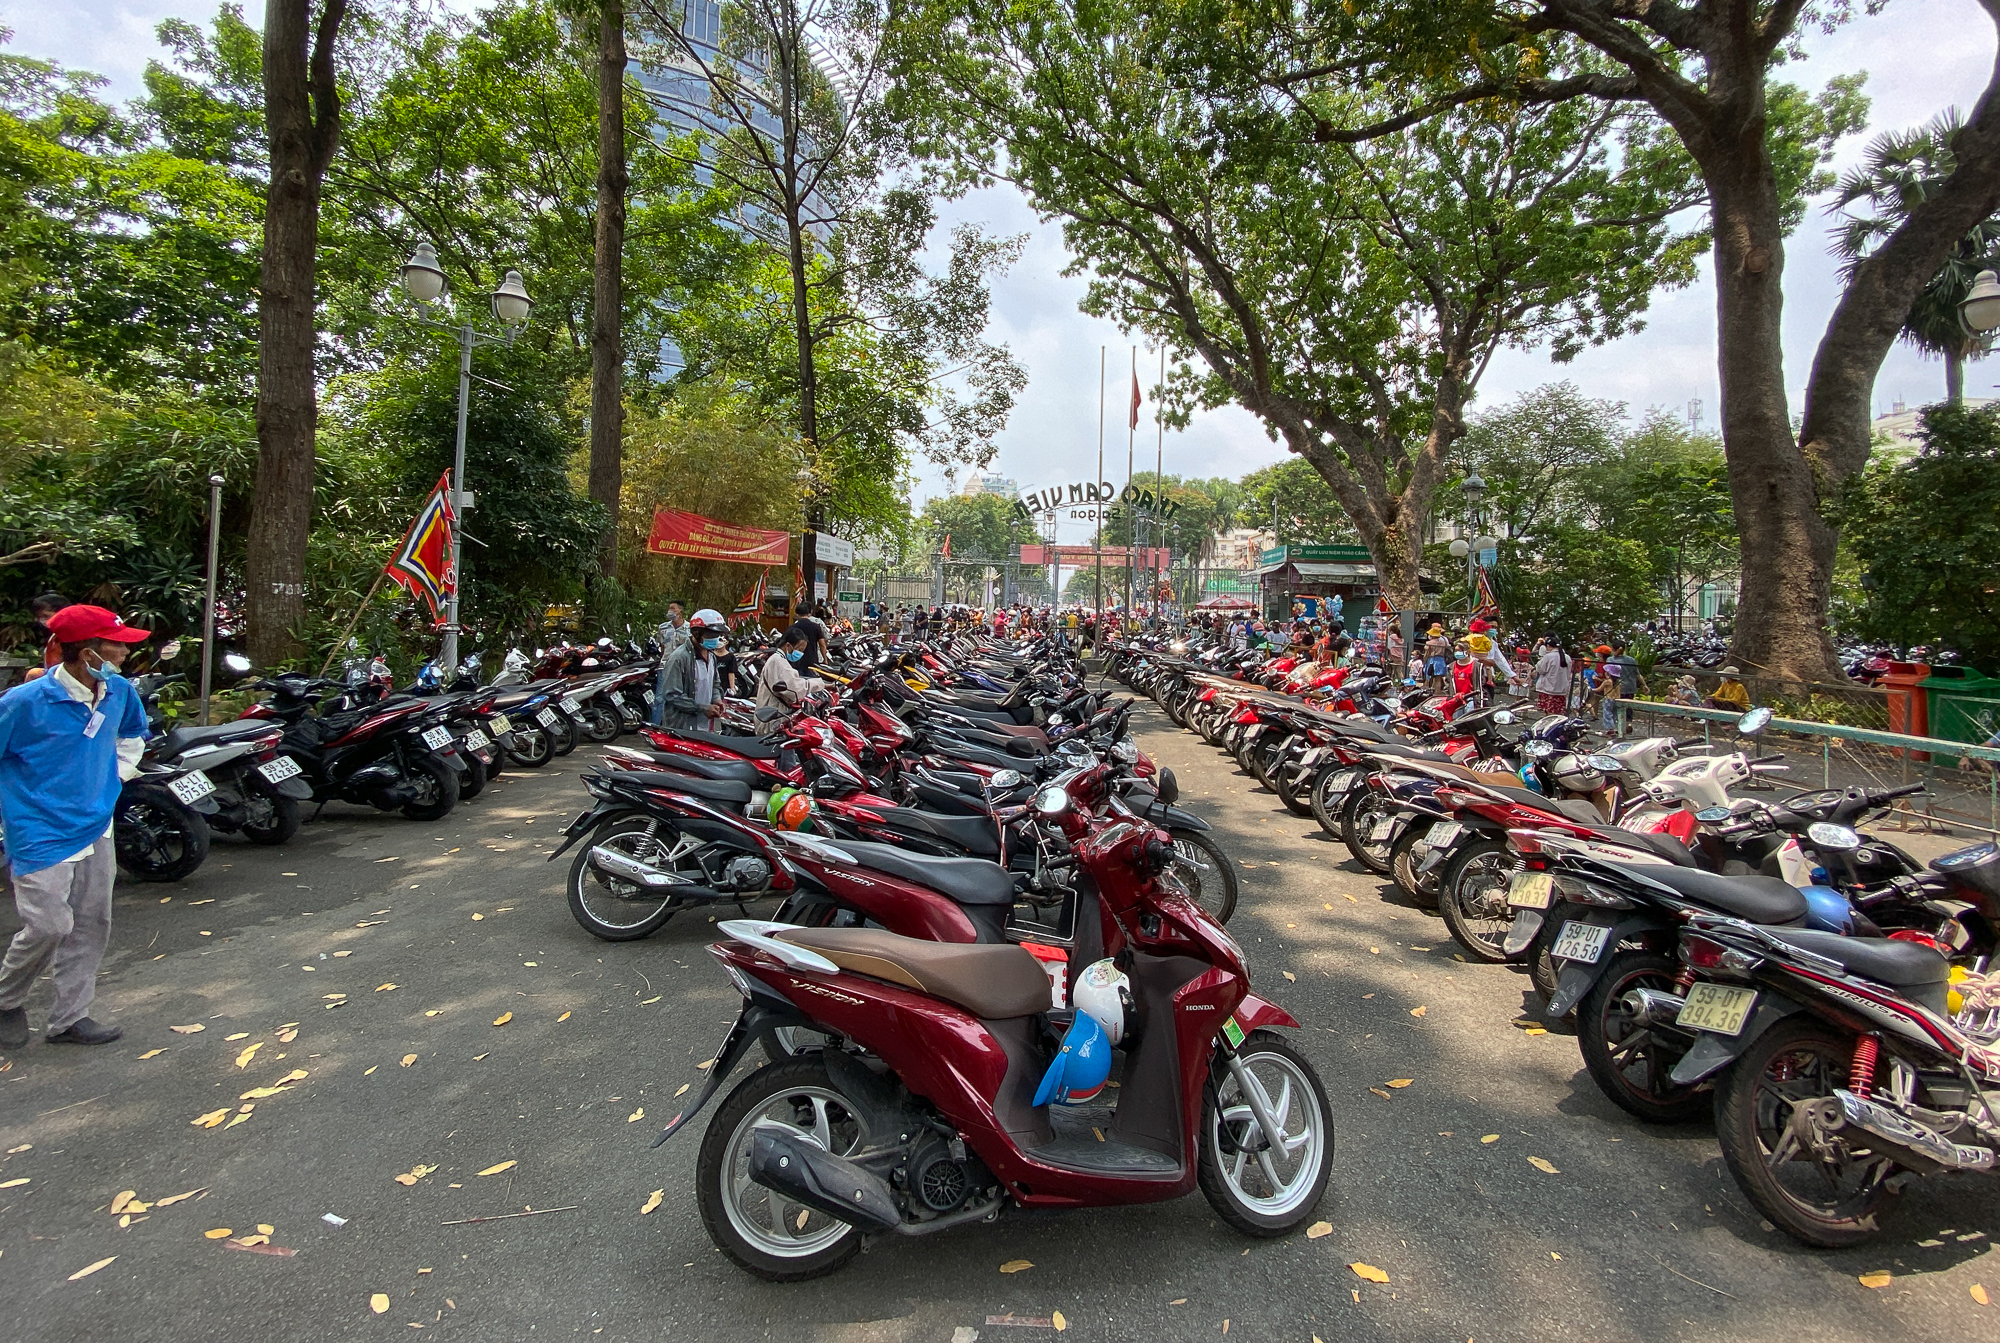 Saigon Zoo and Botanical Garden was crowded with people, guests brought suitcases to camp on the occasion of Hung King's death anniversary - Photo 3.